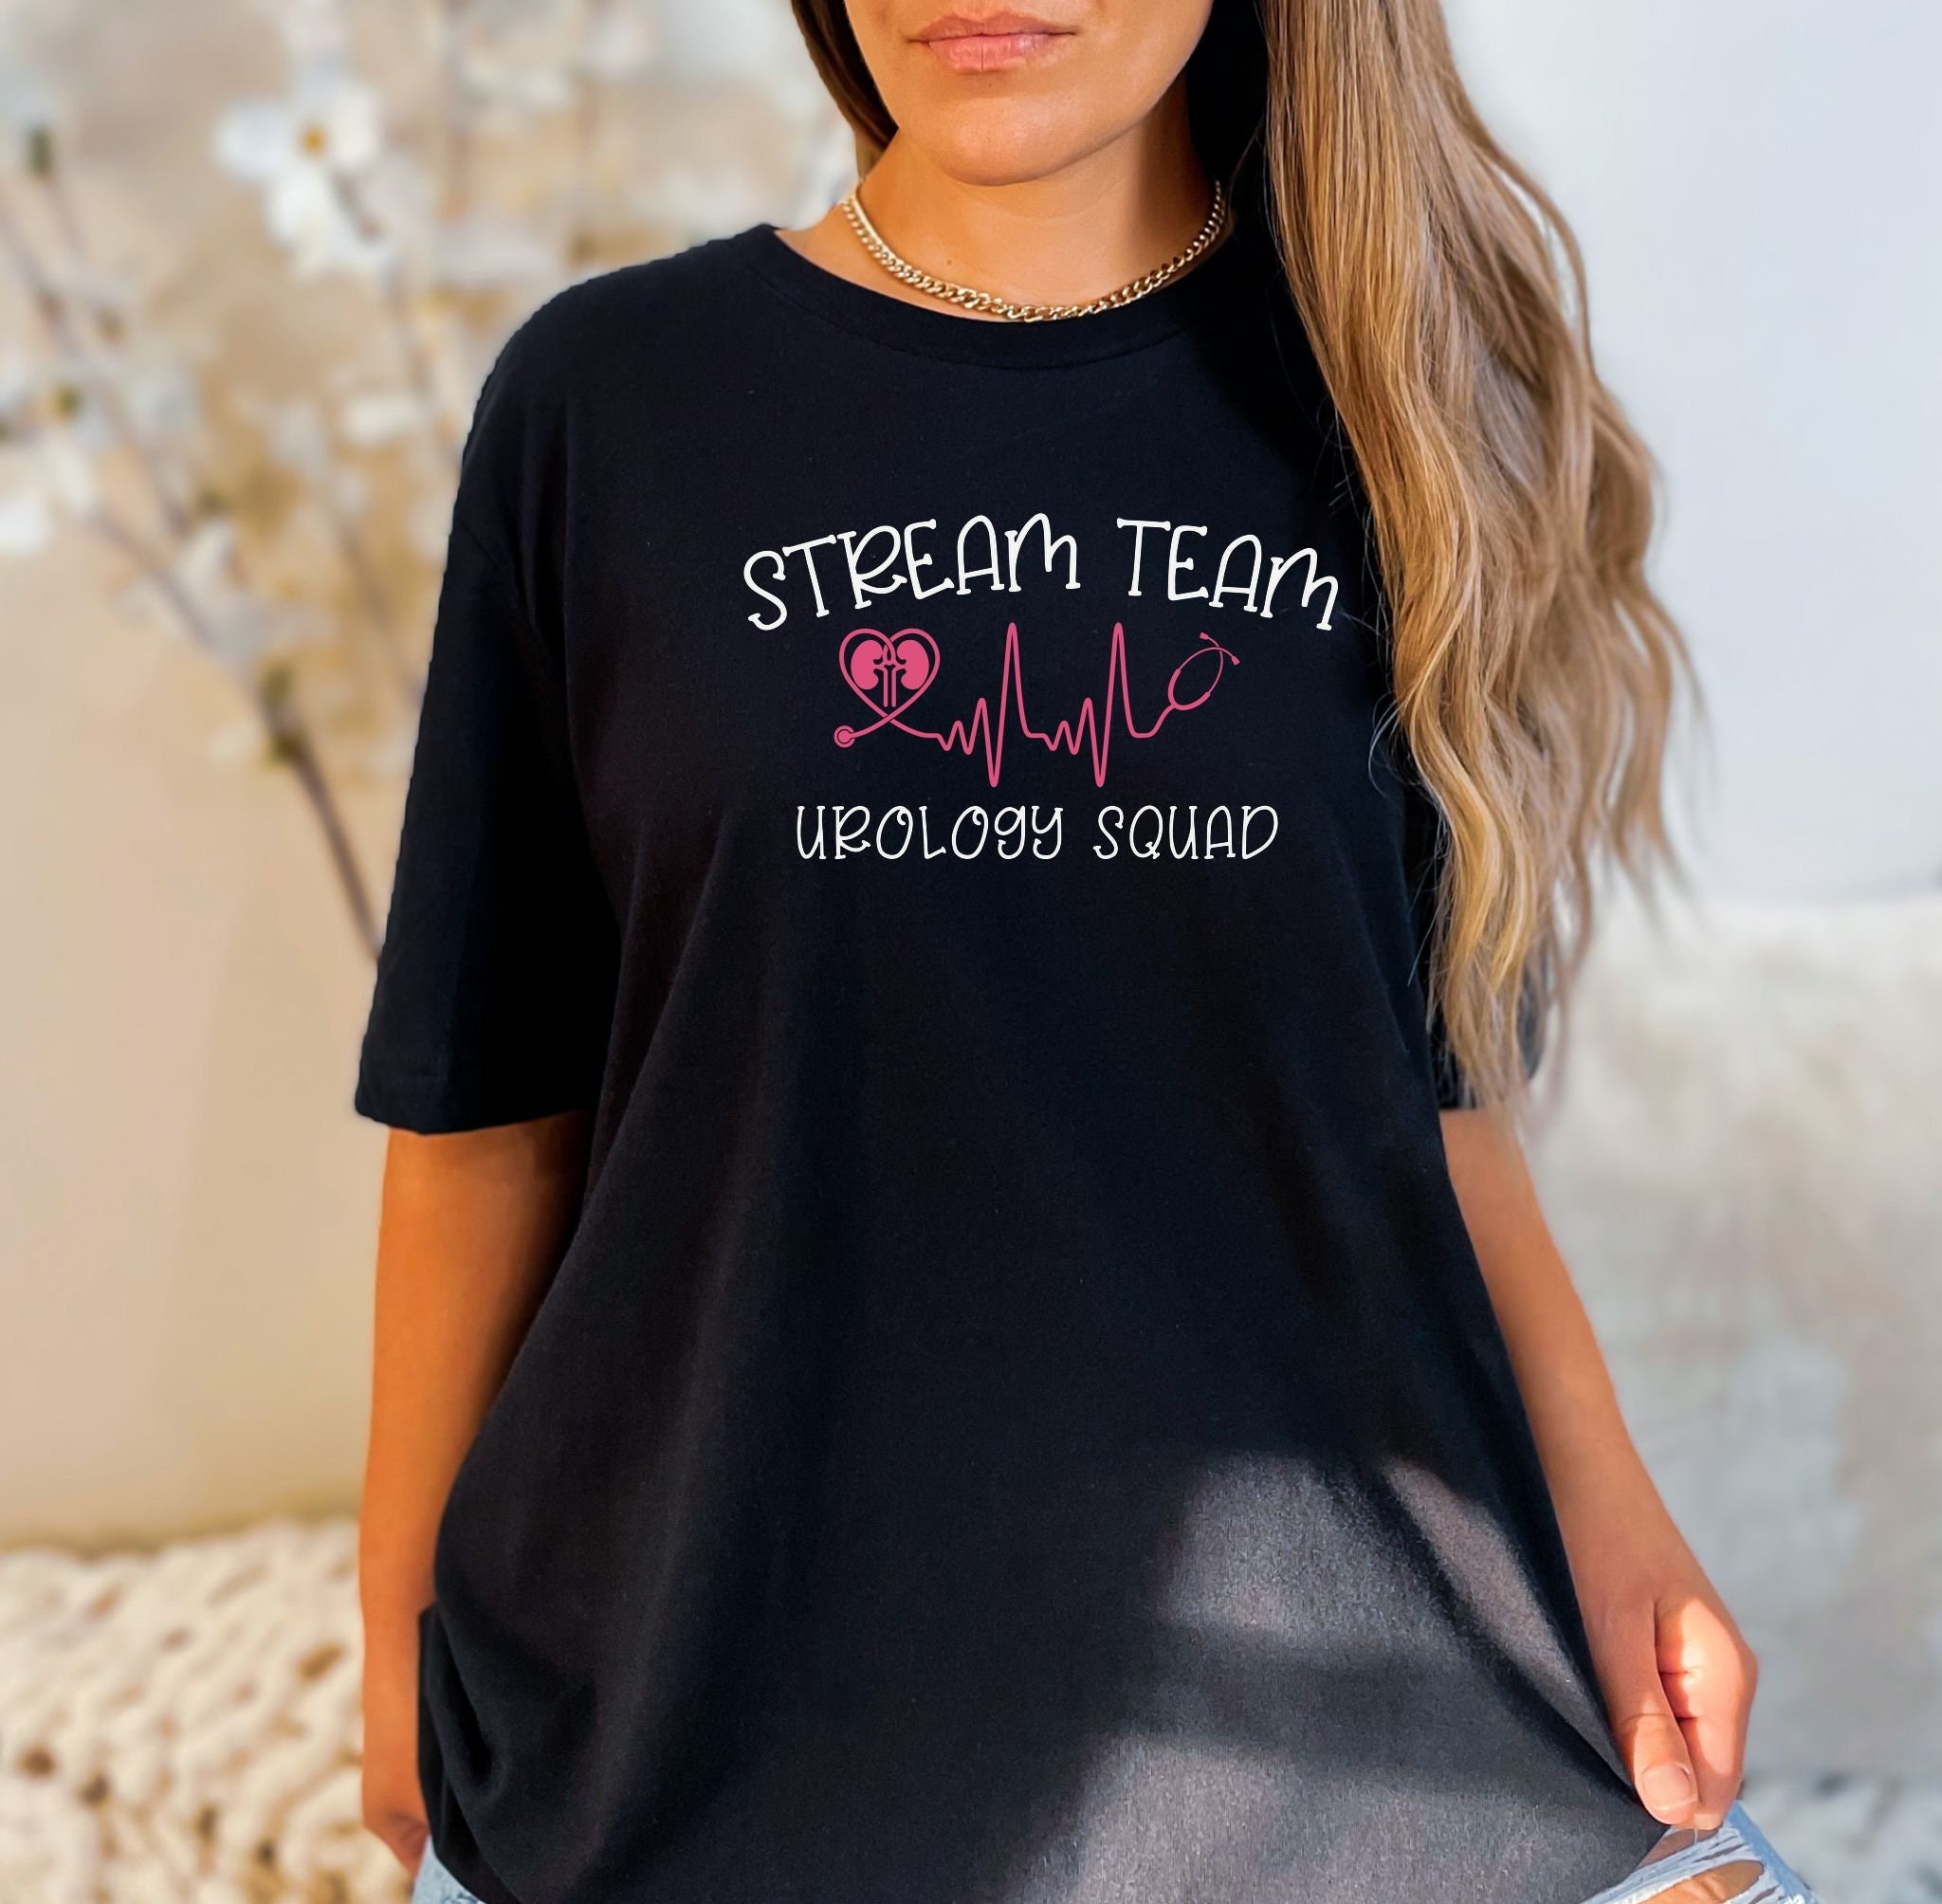 Hosting Stream T-Shirts for Sale